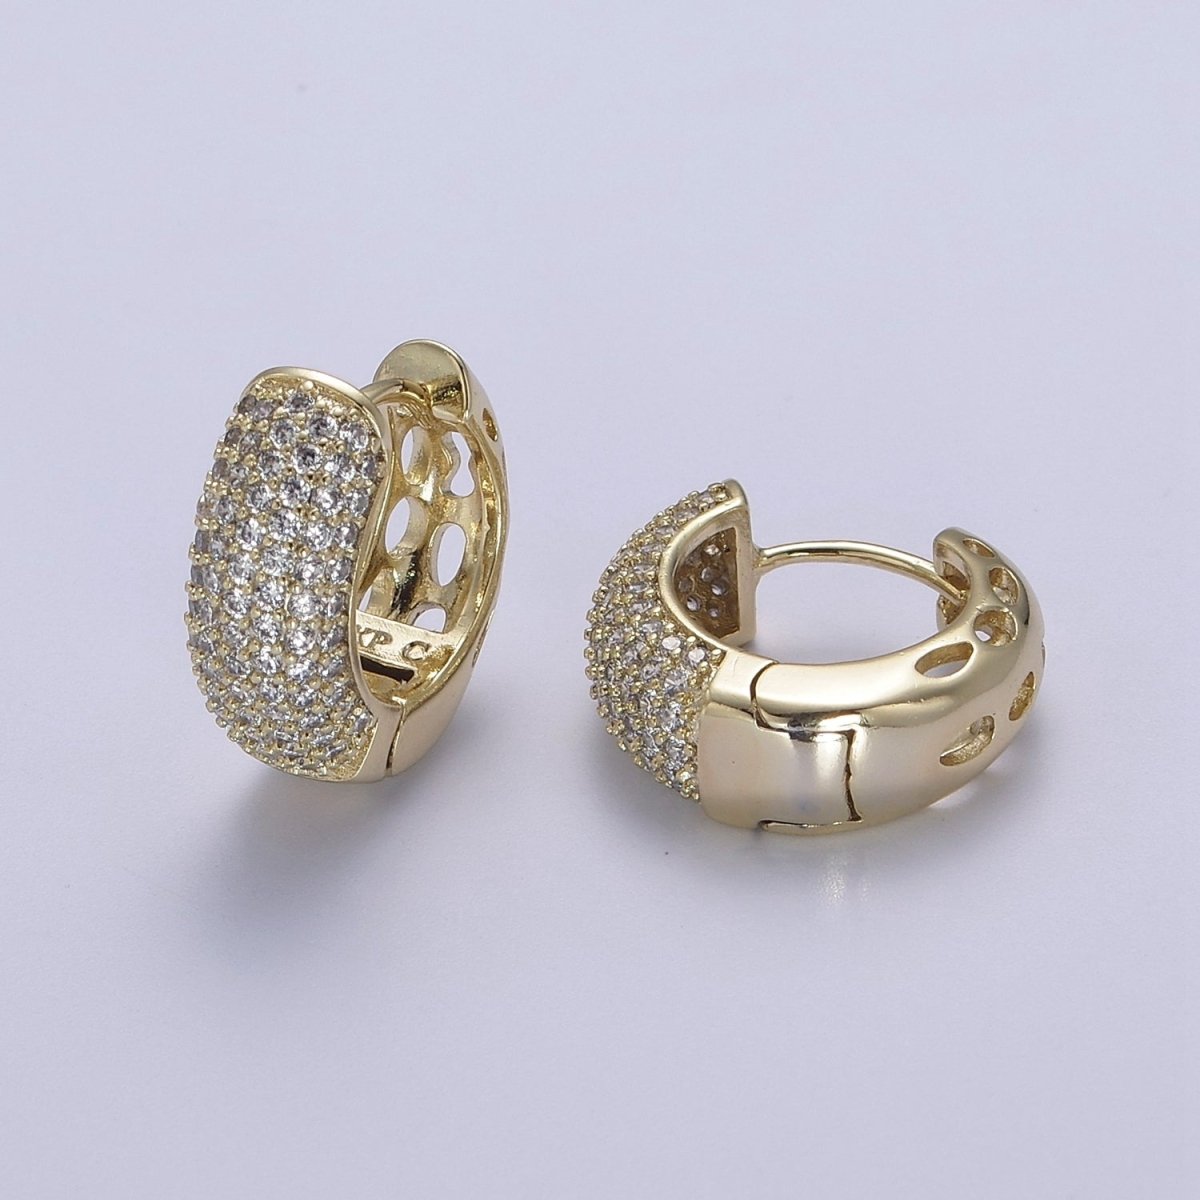 Thick Gold Hoop 18mm Earring 14k Gold Filled CZ Huggie Earring Jewelry V-143 - DLUXCA